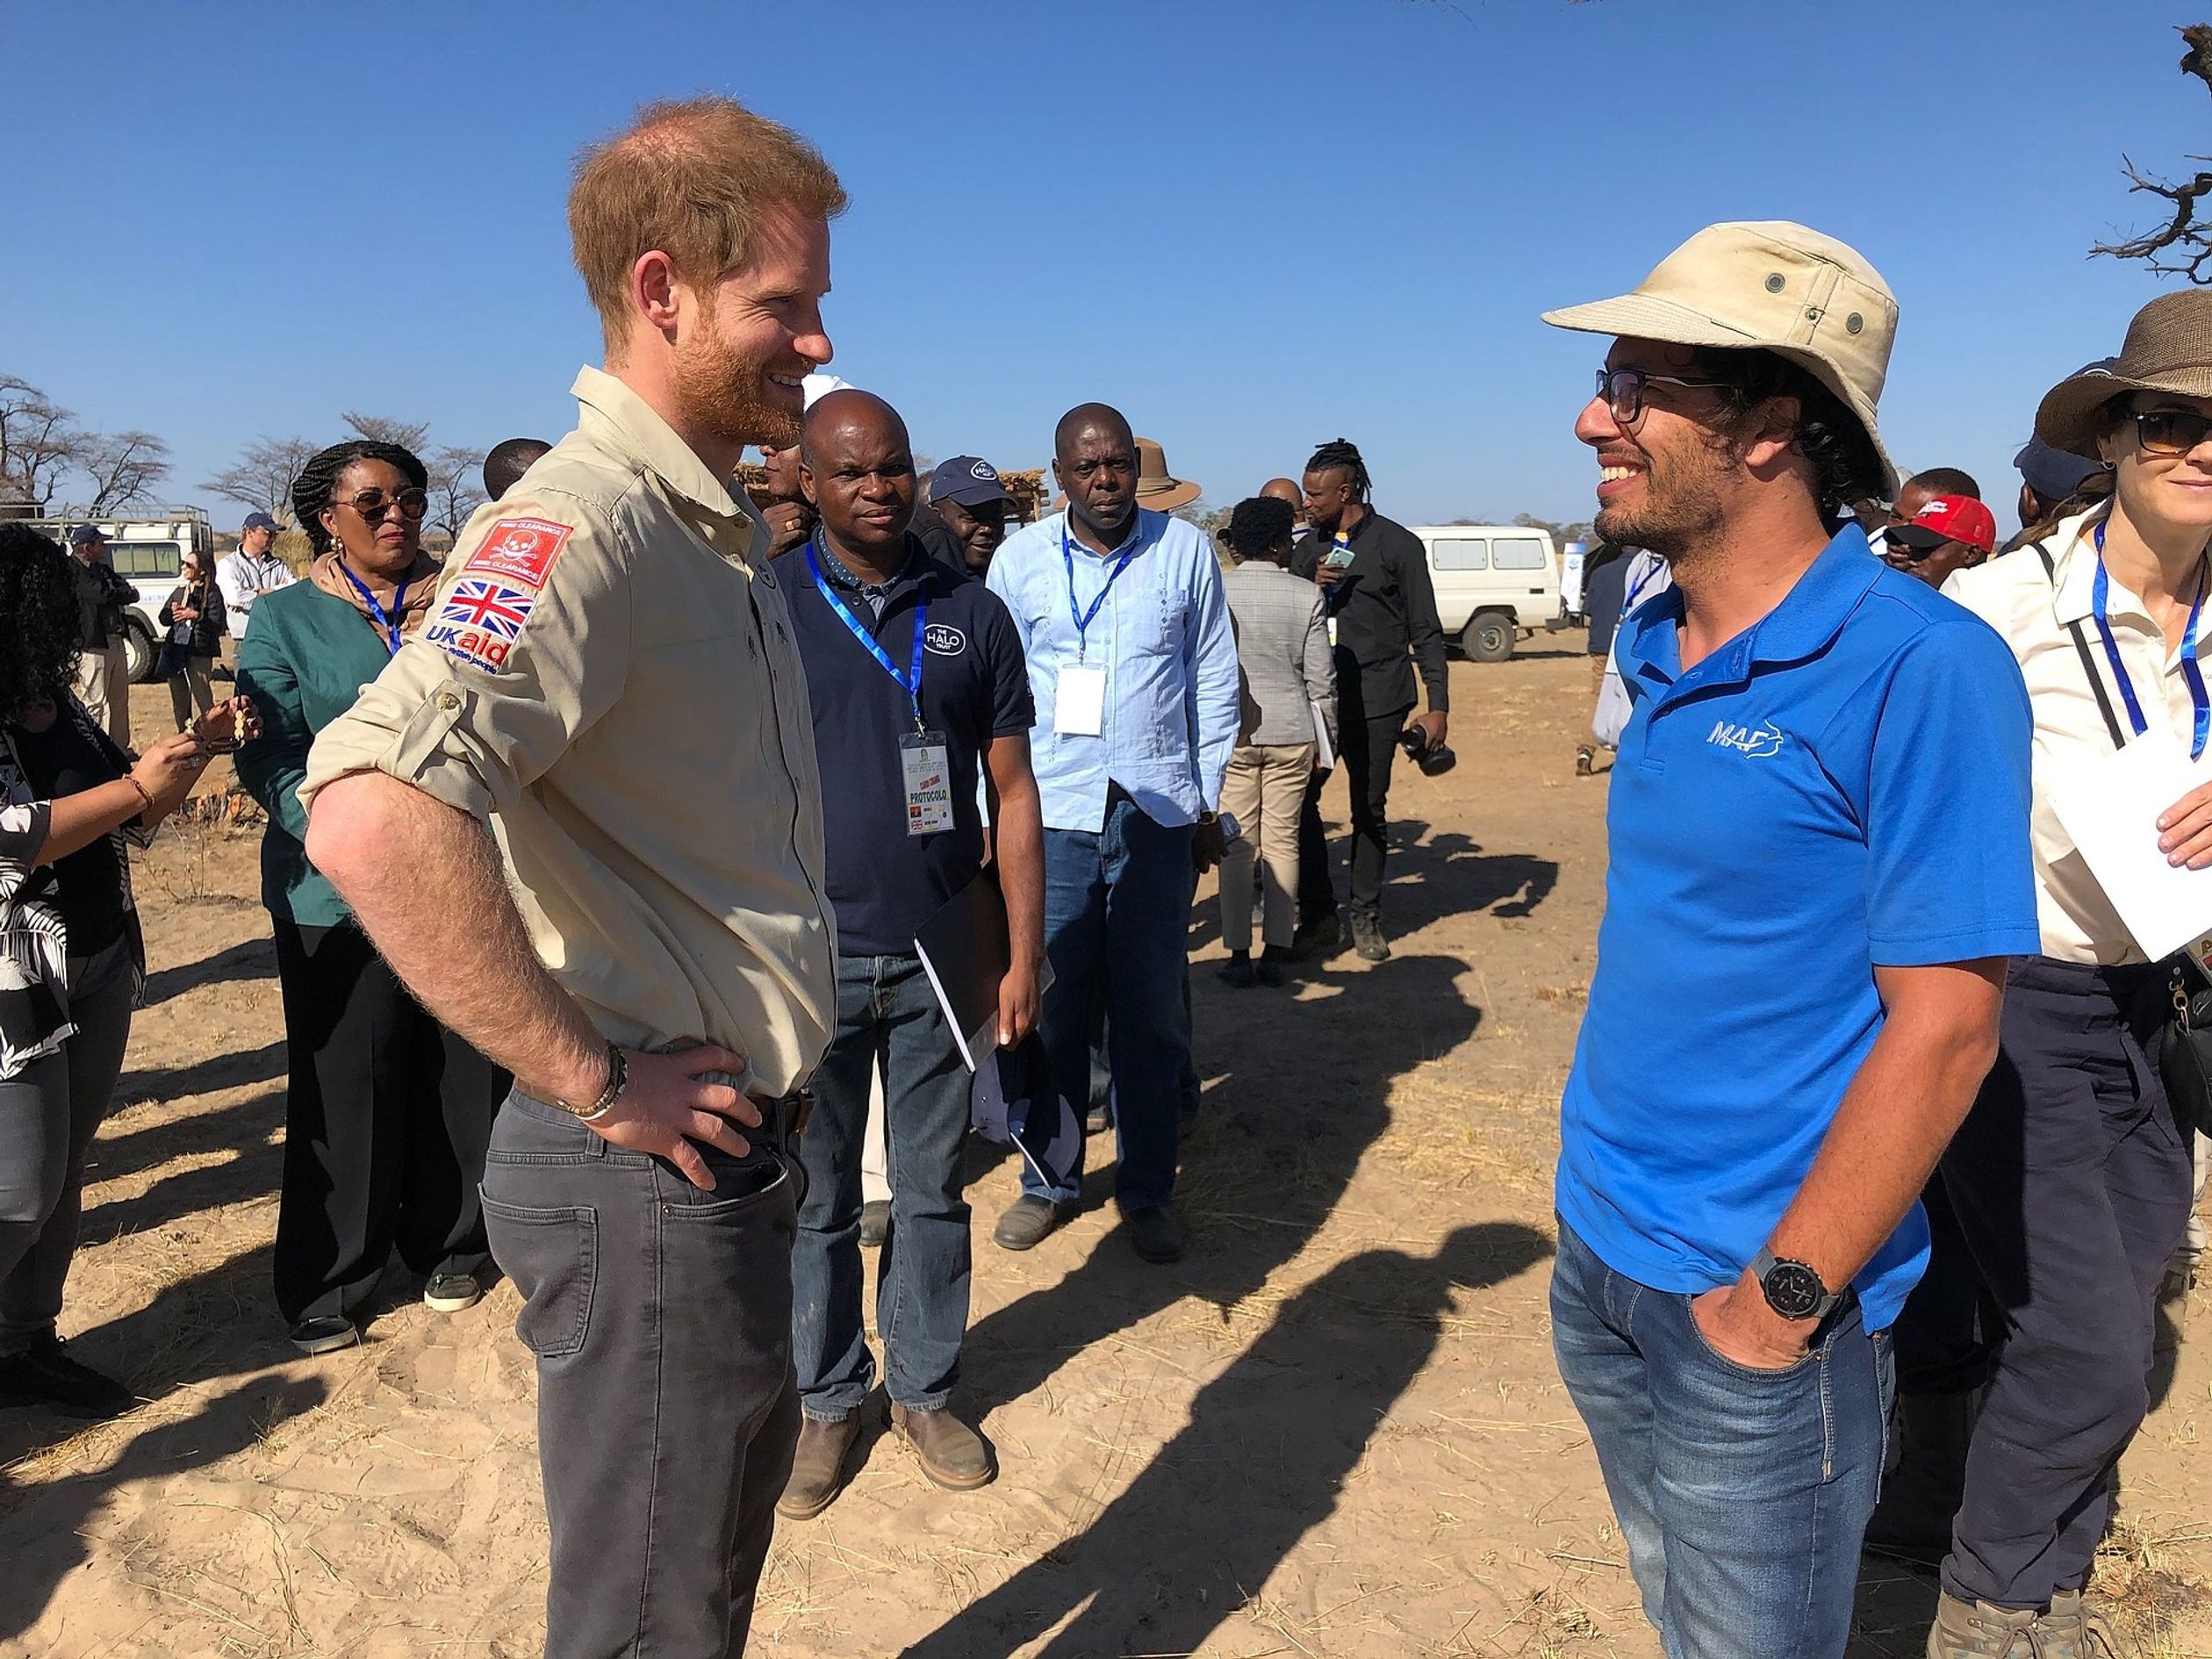 MAF pilot Marijn Goud was incredibly honoured to meet The Duke of Sussex in Dirico, Angola, on